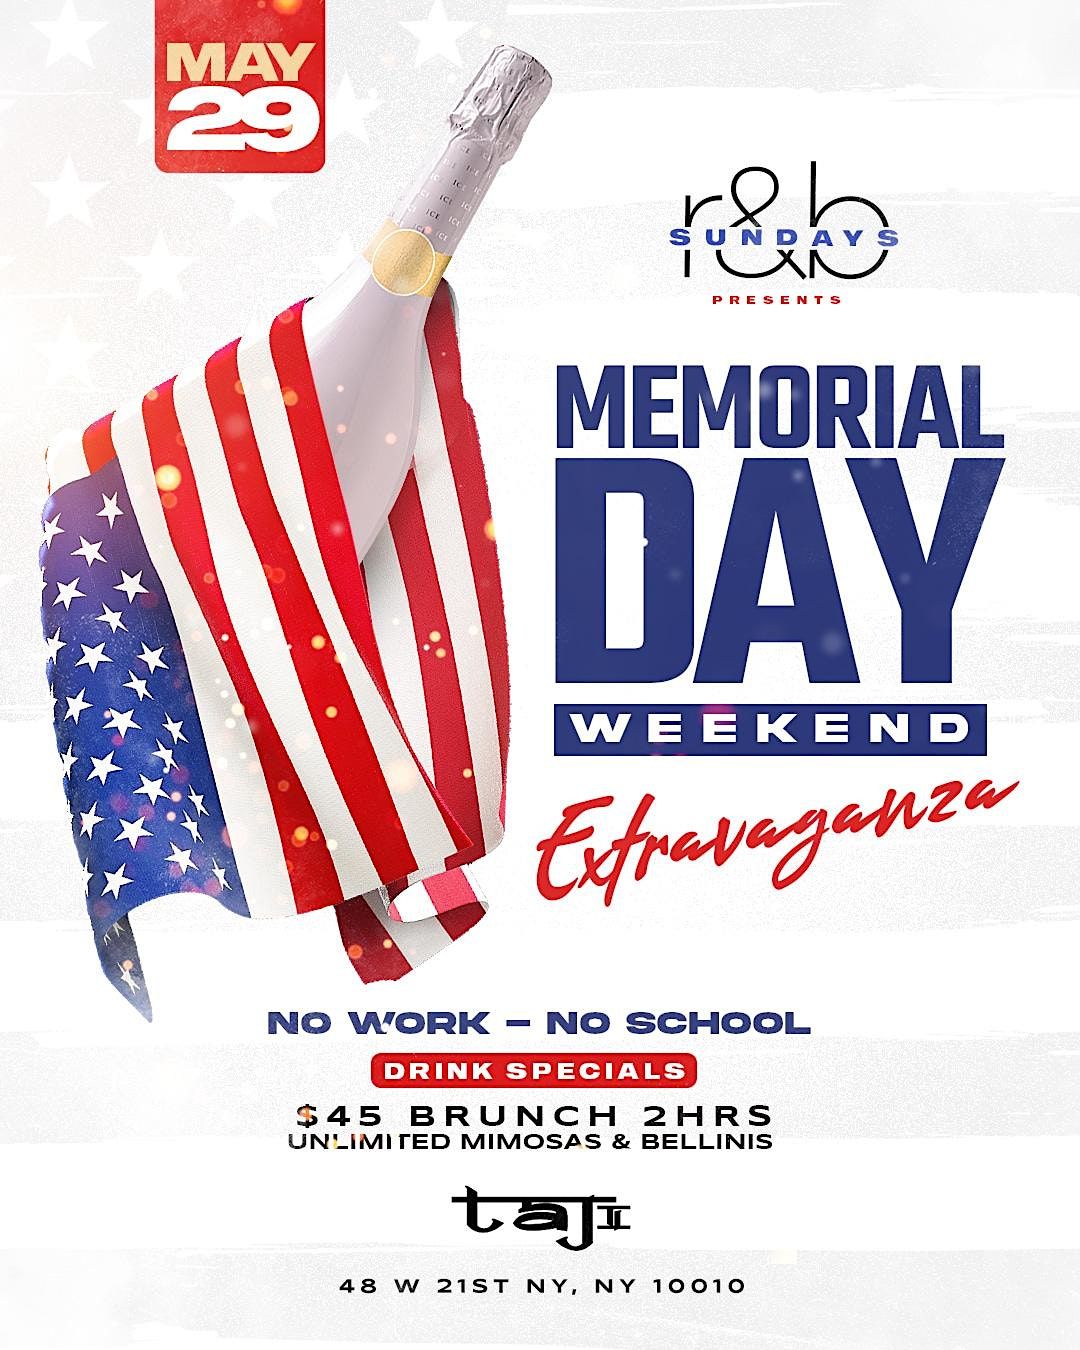 Power105 MEMORIAL DAY WEEKEND EXTRAVAGANZA (R&B EDITION) Brunch & Day Party